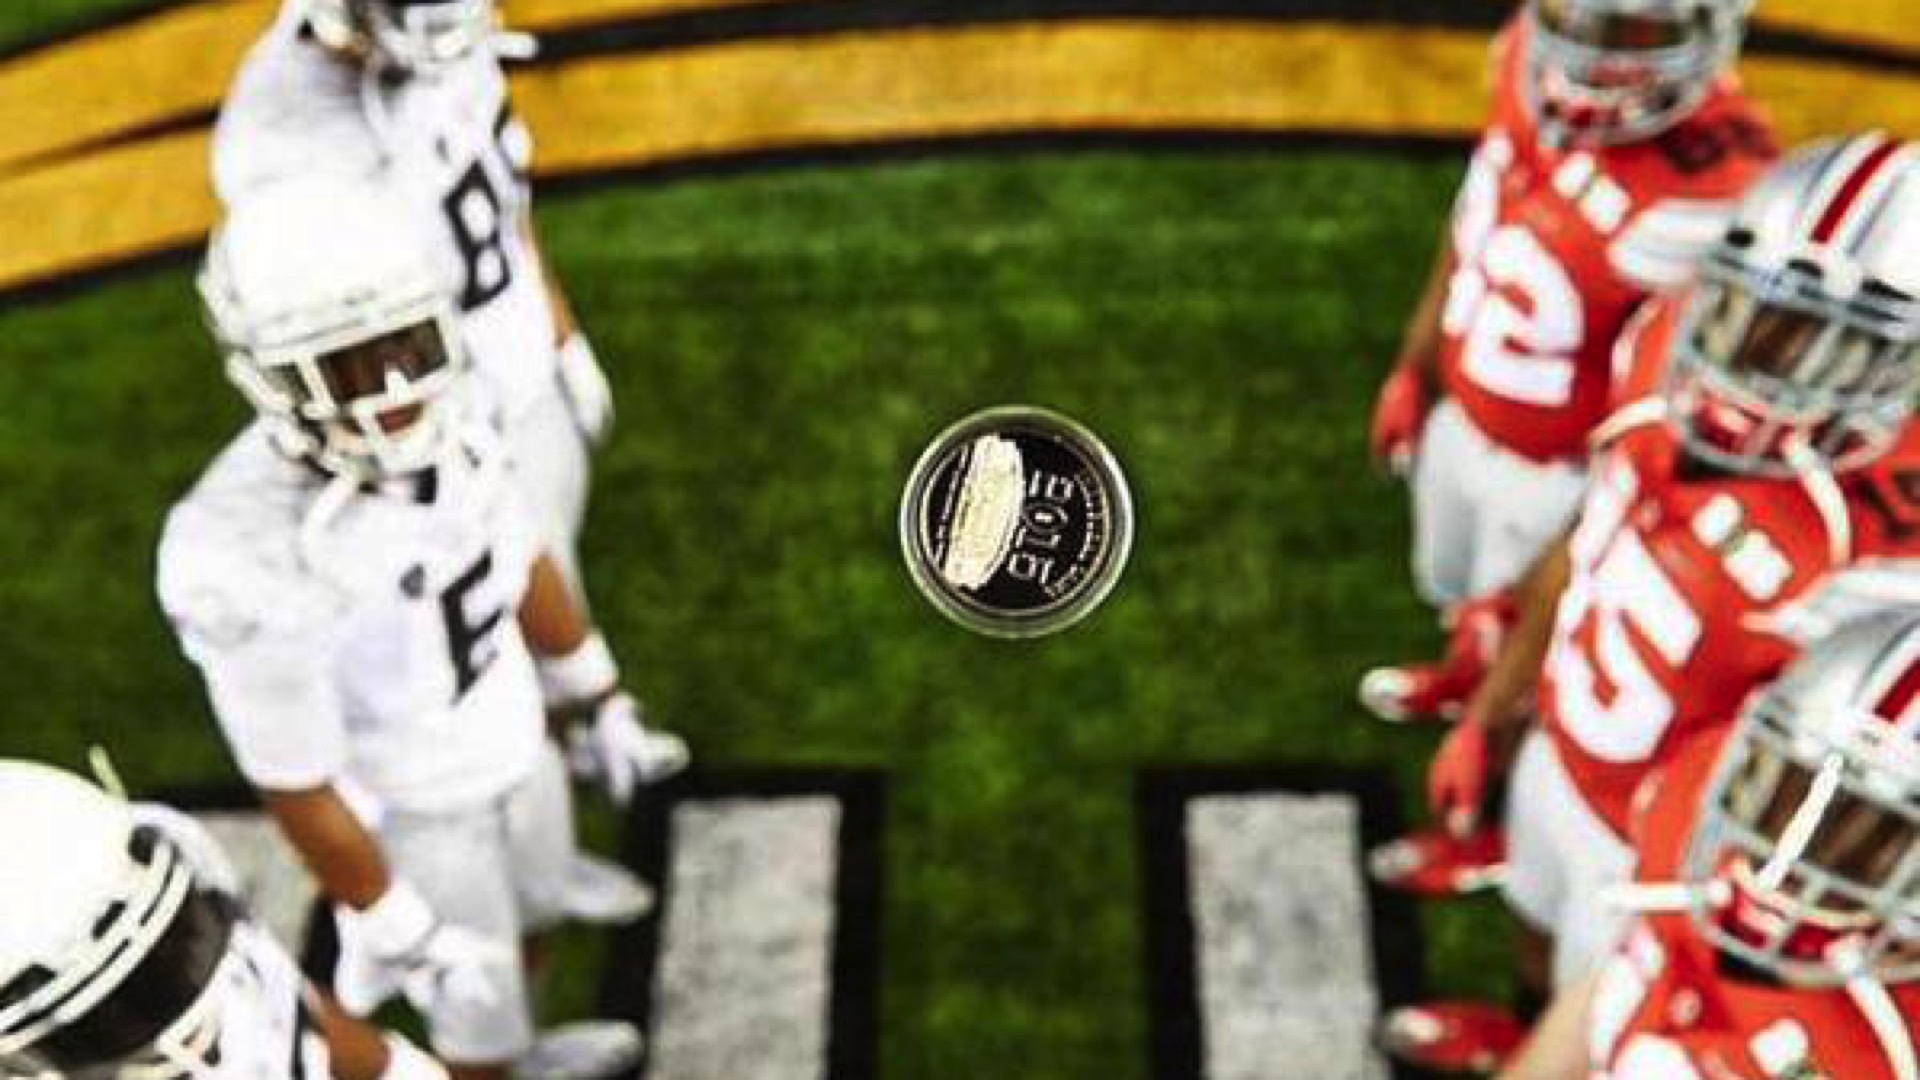 Incredible coin toss photo from OSUOregon is just a Nike promo NCAA